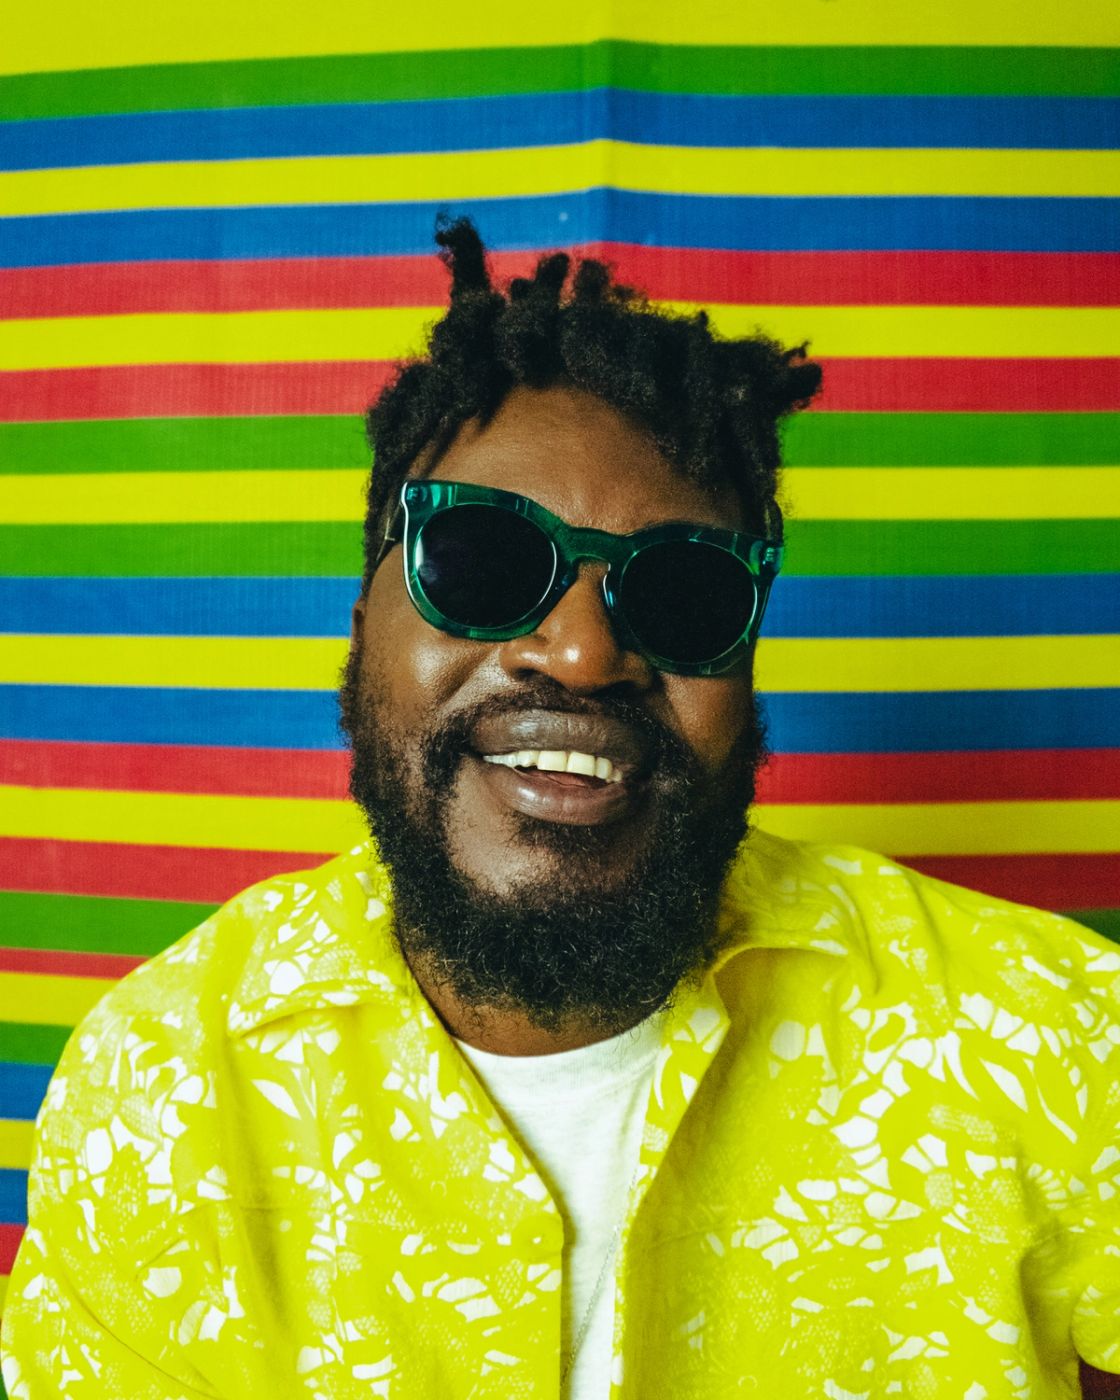 A portrait of musician Blinky Bill wearing sunglasses taken against a colourful striped background